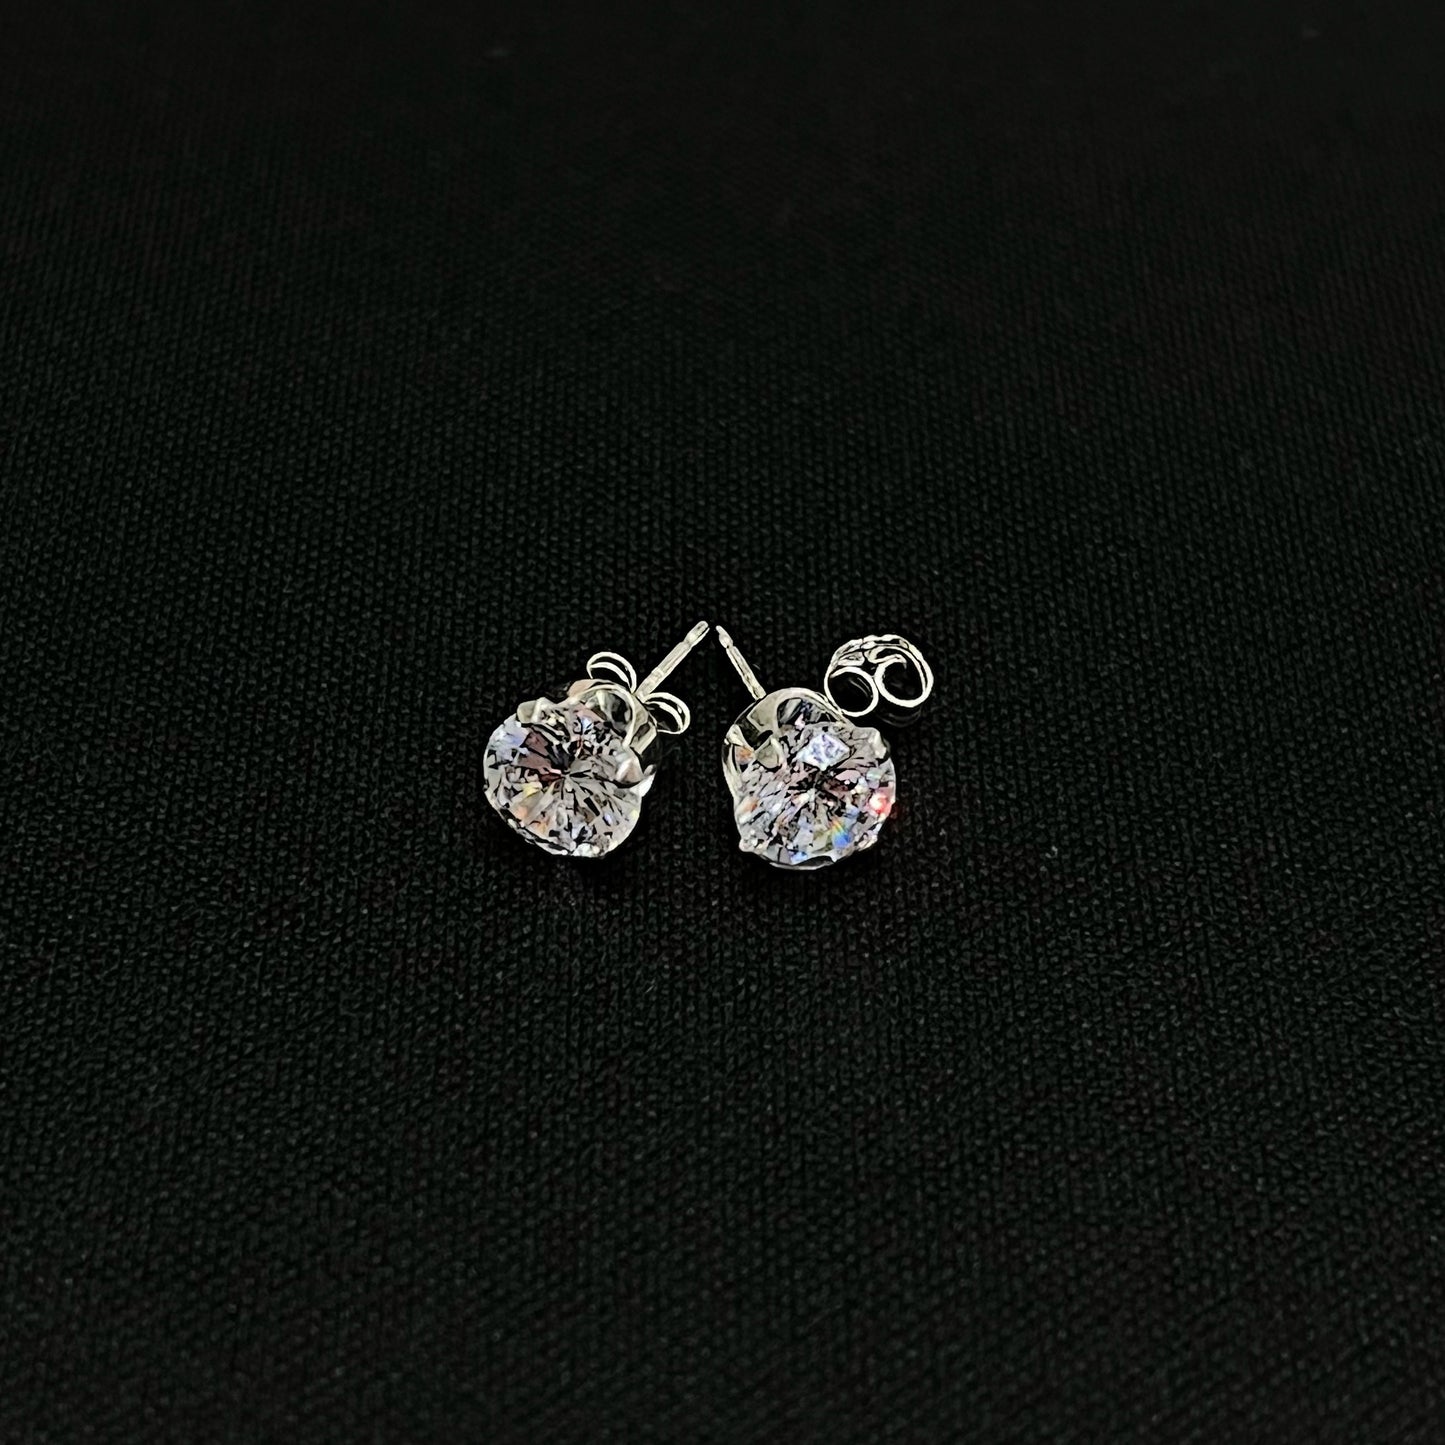 Sterling Silver Round CZ Earrings